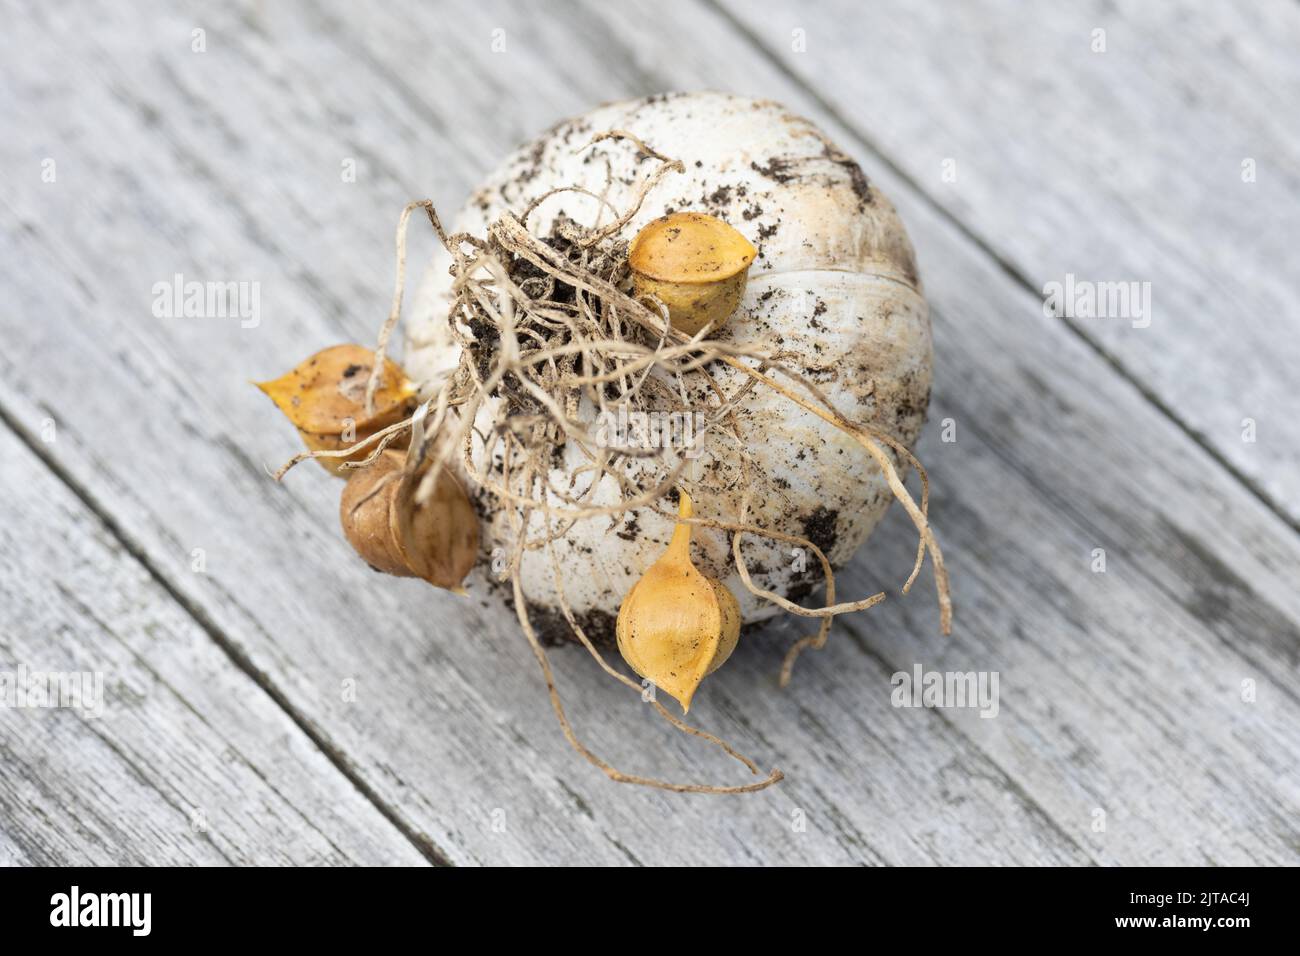 Elephant Garlic - harvested with garlic corms or seeds attached to the roots - UK Stock Photo